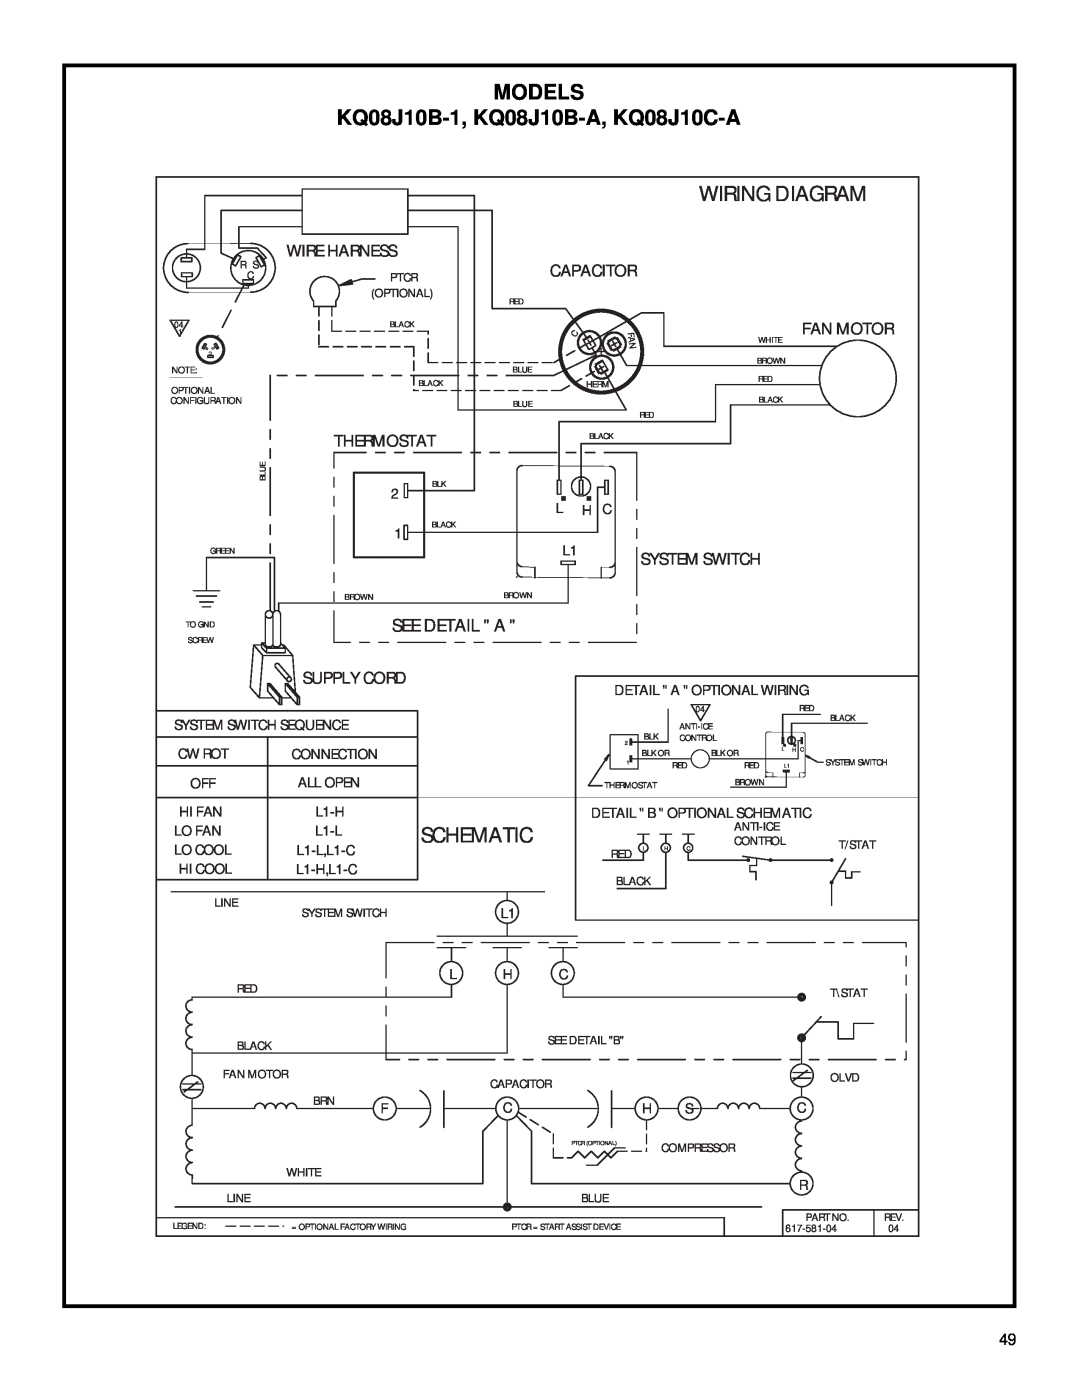 Friedrich 2003 KQ08J10B-1, KQ08J10B-A, KQ08J10C-A, Wiring Diagram, Models, Schematic, See Detail A, Fan Motor, Thermostat 